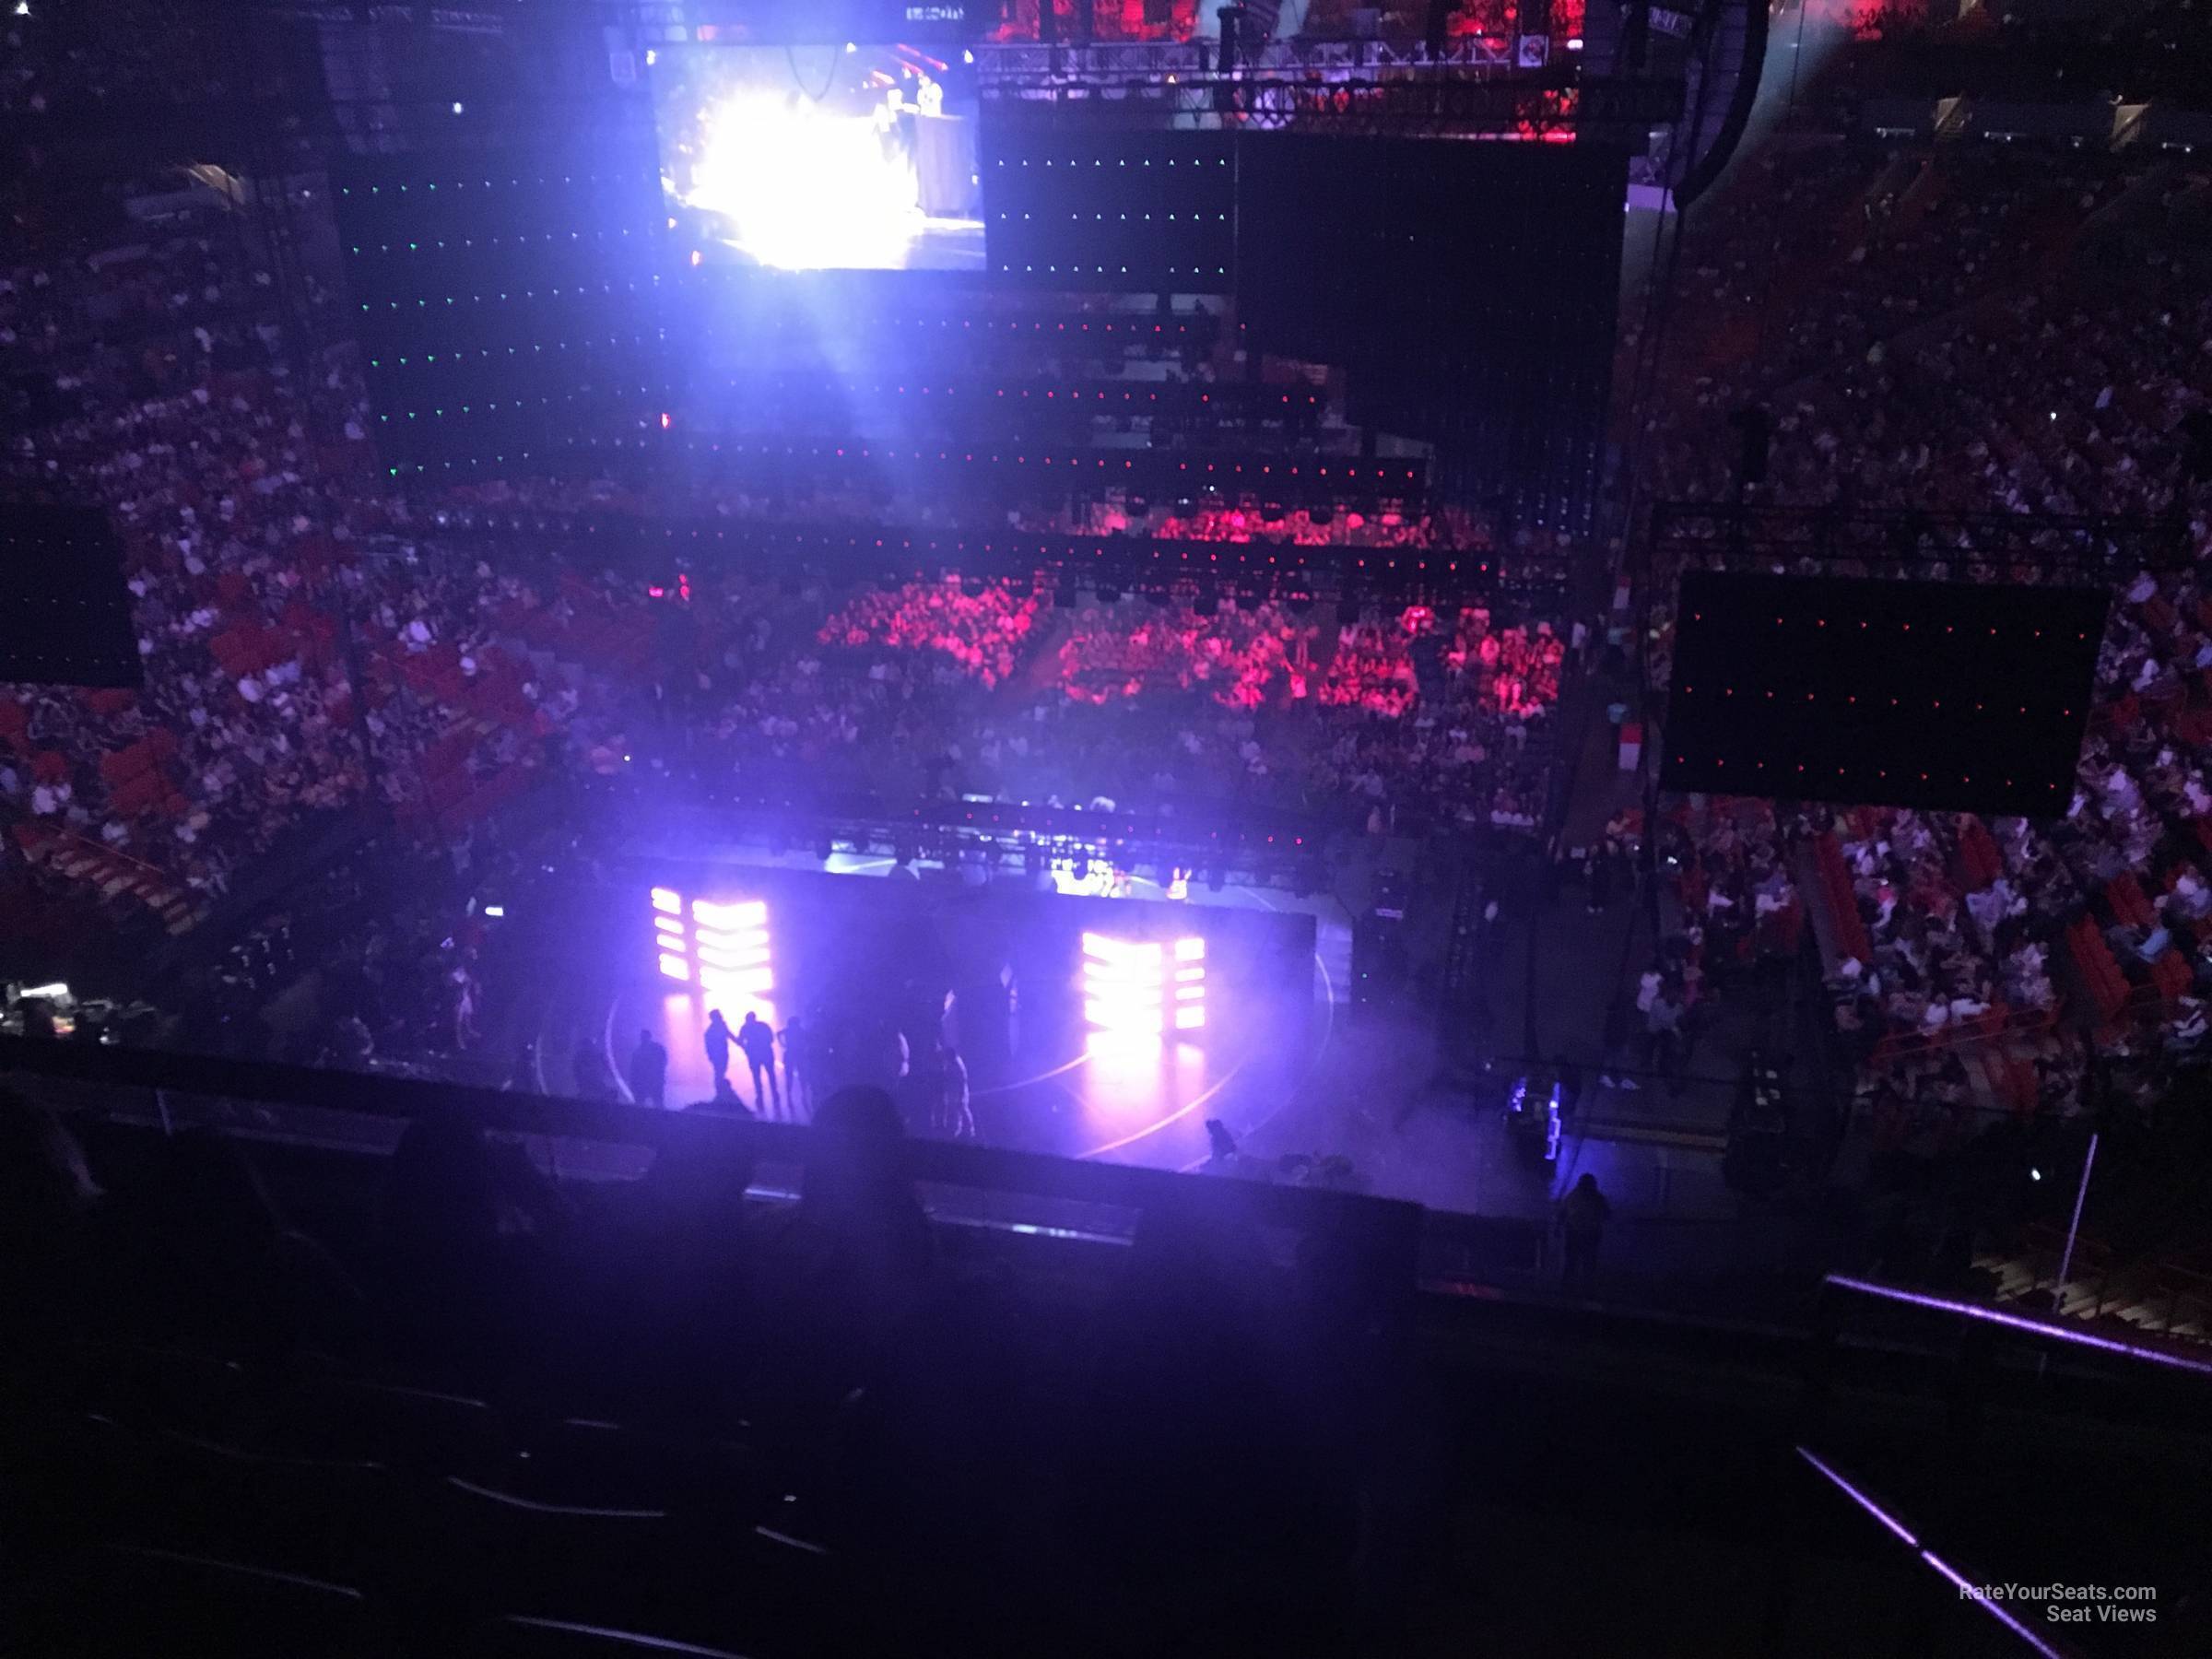 section 331, row 3 seat view  for concert - kaseya center